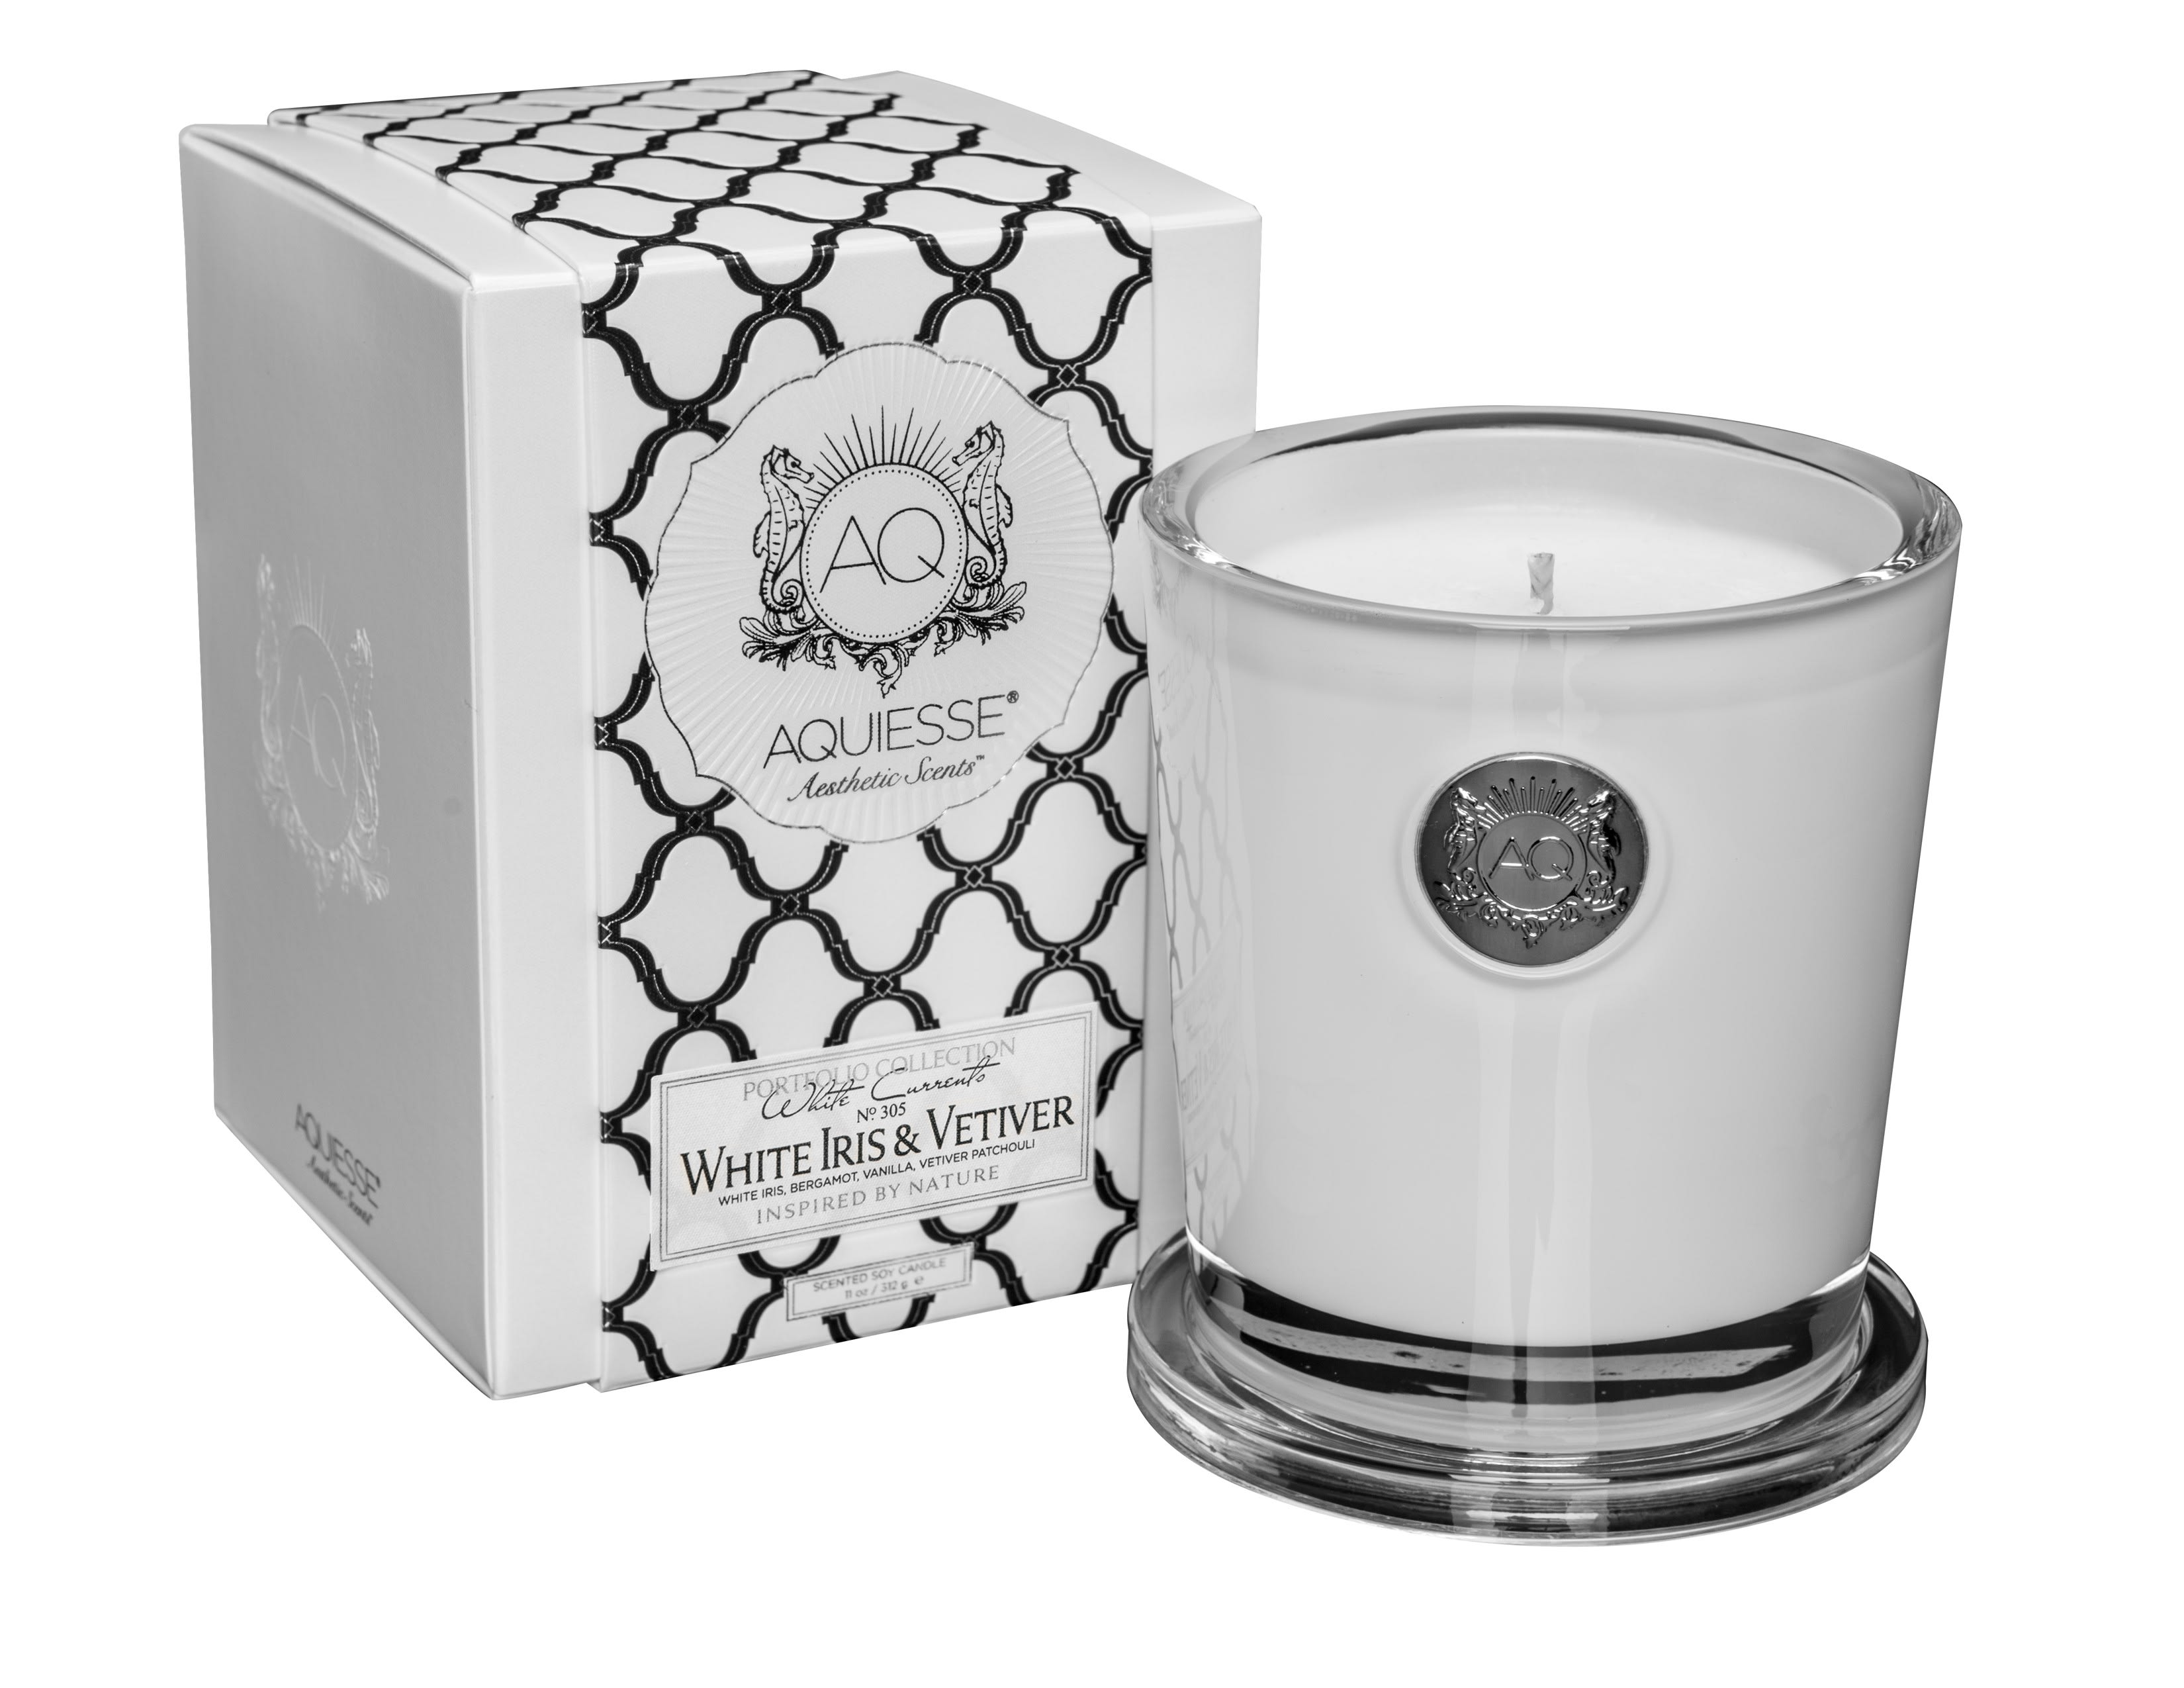 Aquiesse White Iris & Vetiver- 11 oz Soy Candle in Arcadia, CA | MDS ...